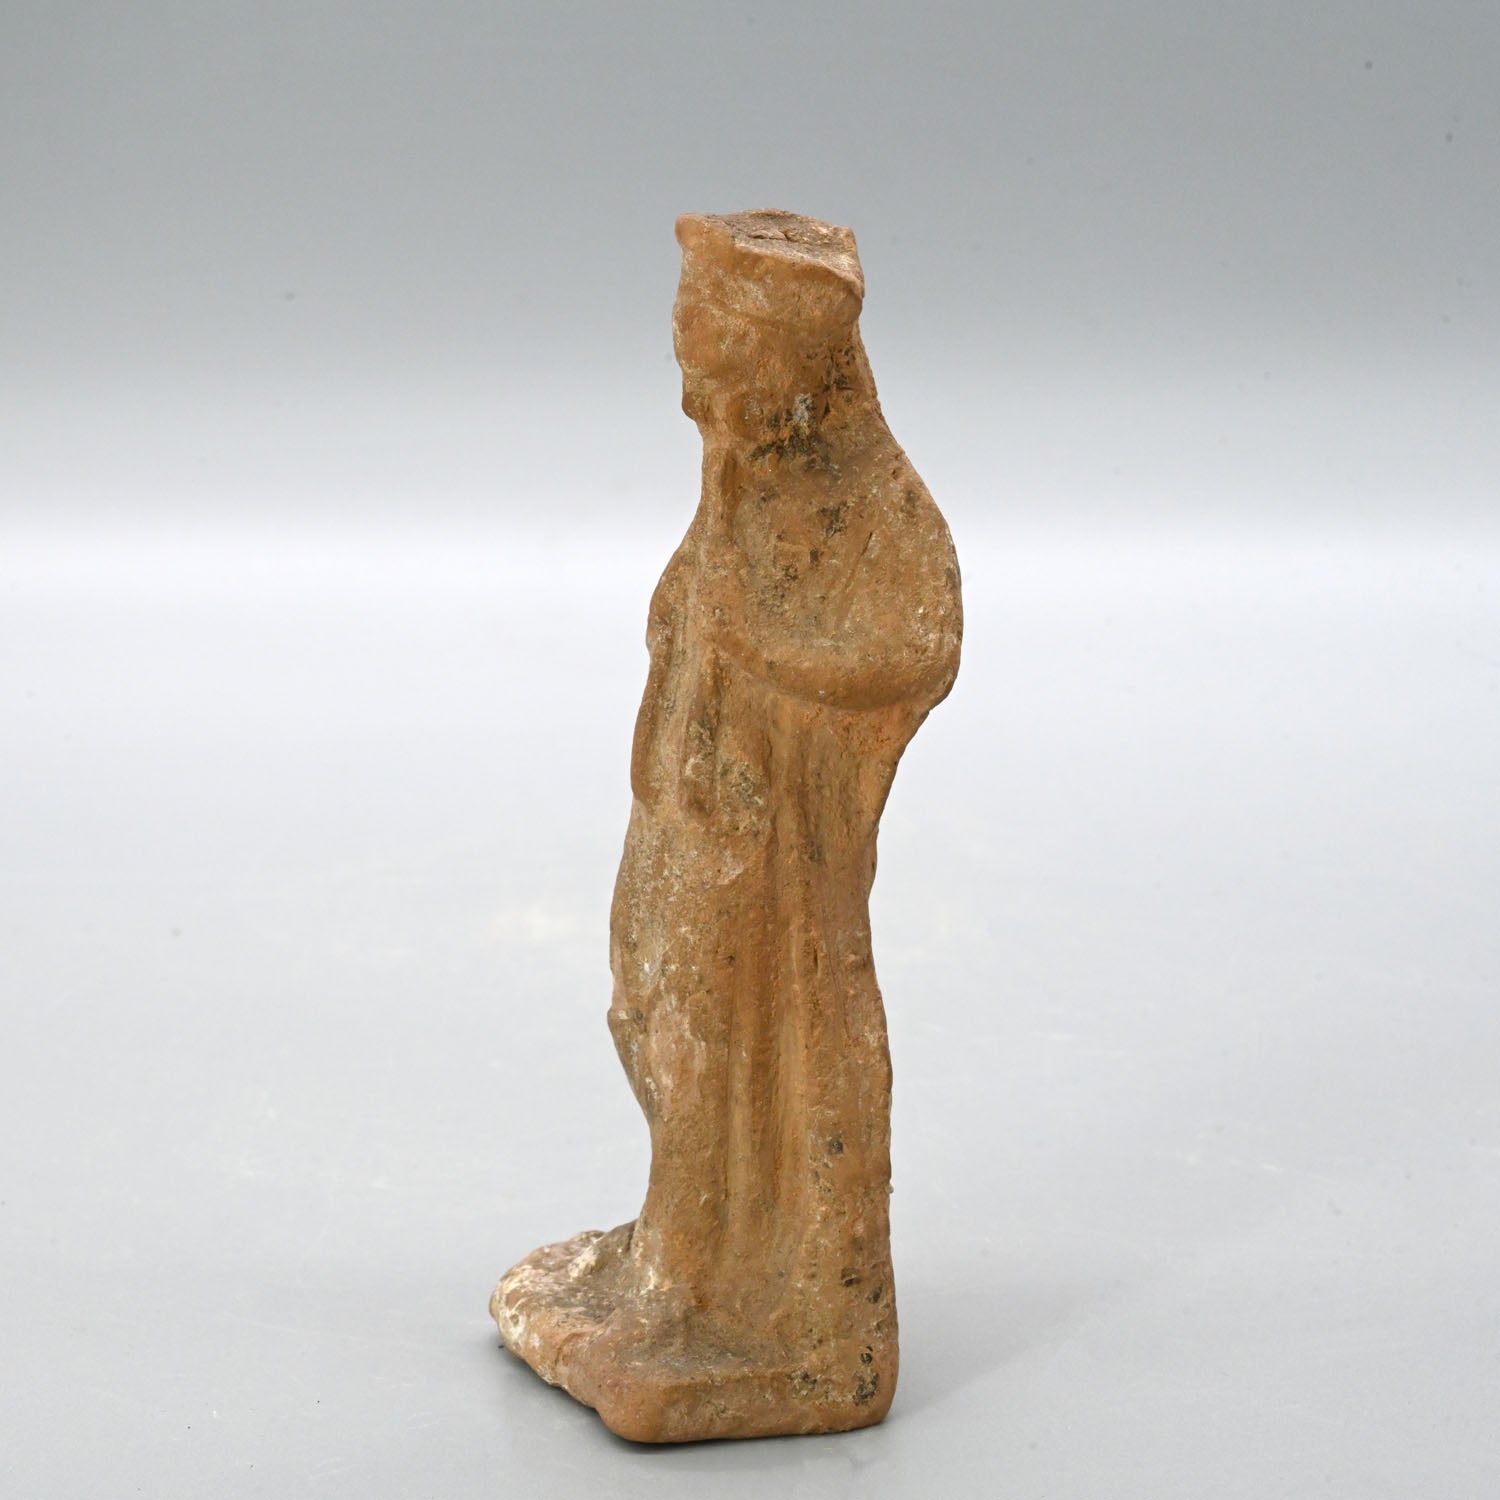 An Attic terracotta figurine of a Girl playing Auloi (double pipes)<br><em>Tanagra, ca. 3rd century BCE</em>